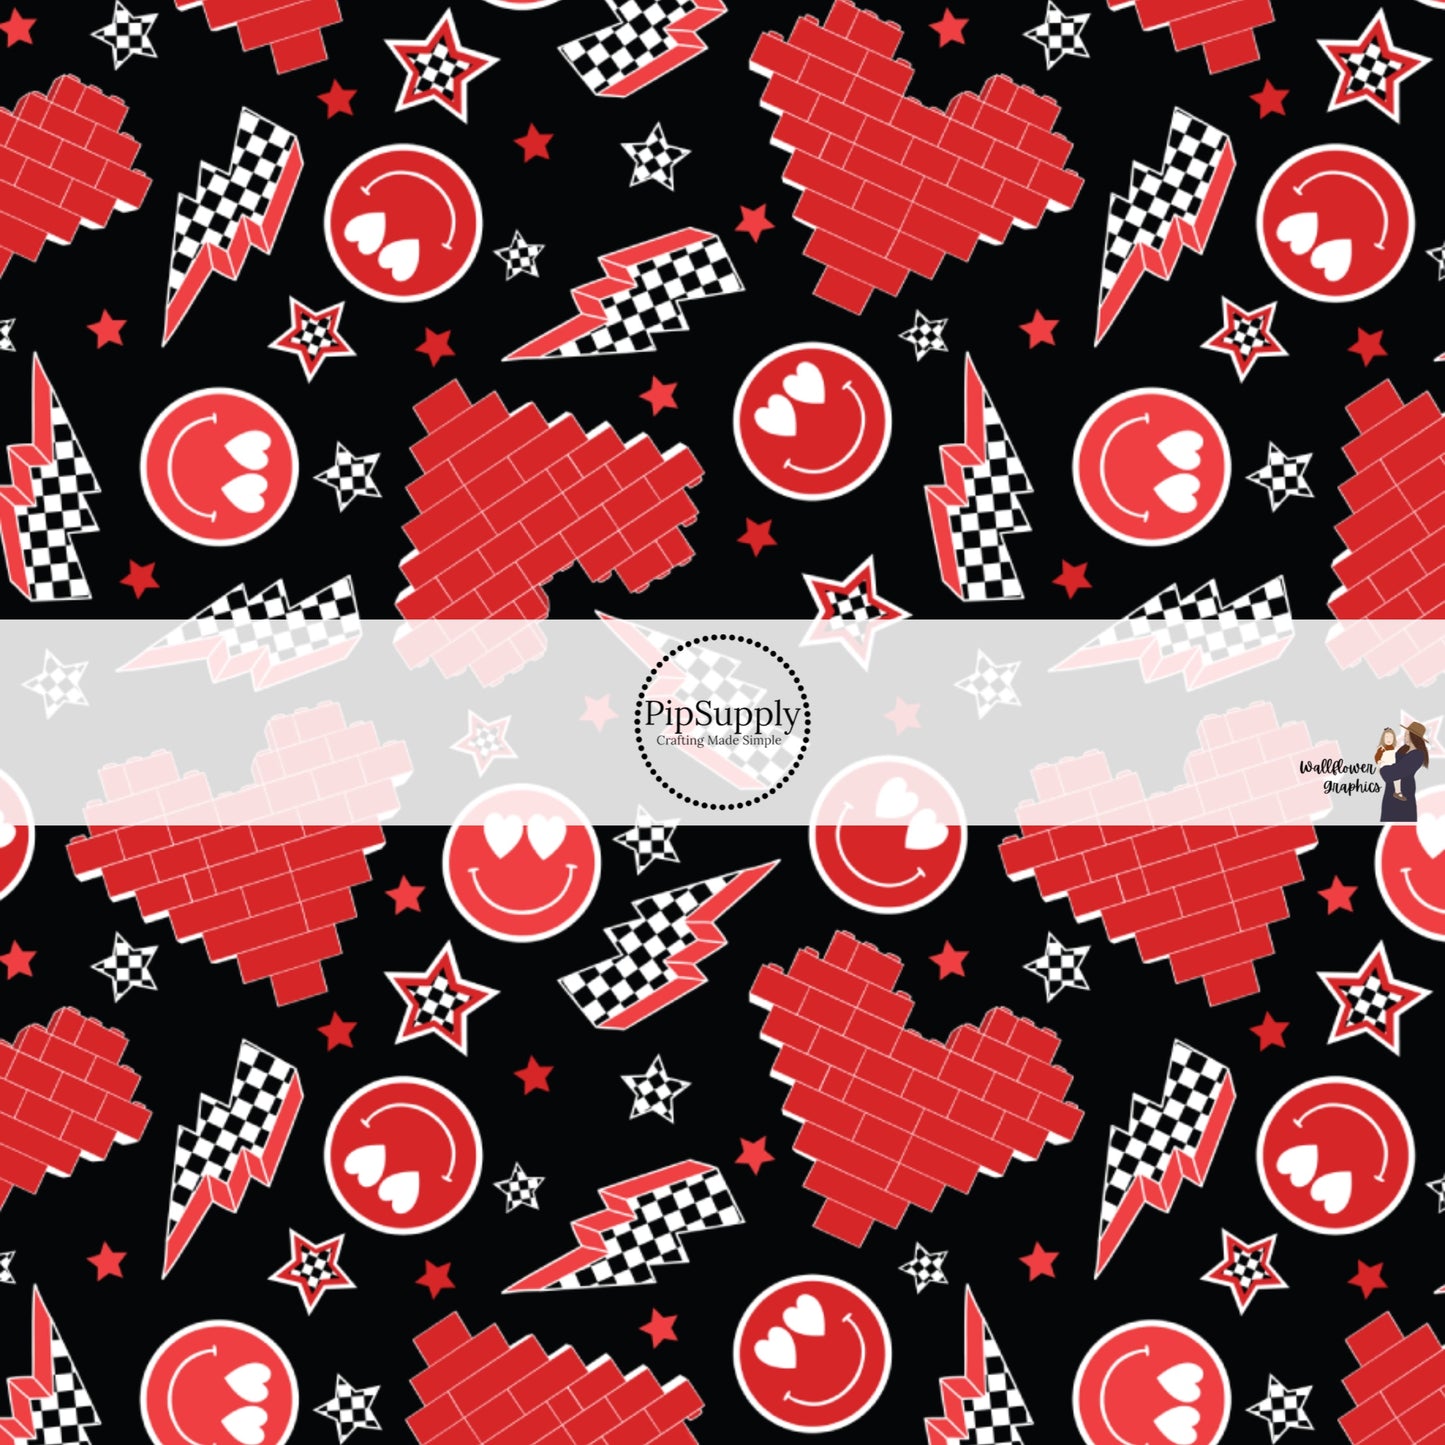 Red Hearts, Smiley Faces, and Lightning Bolts on Black Valentine's Day Fabric by the Yard.